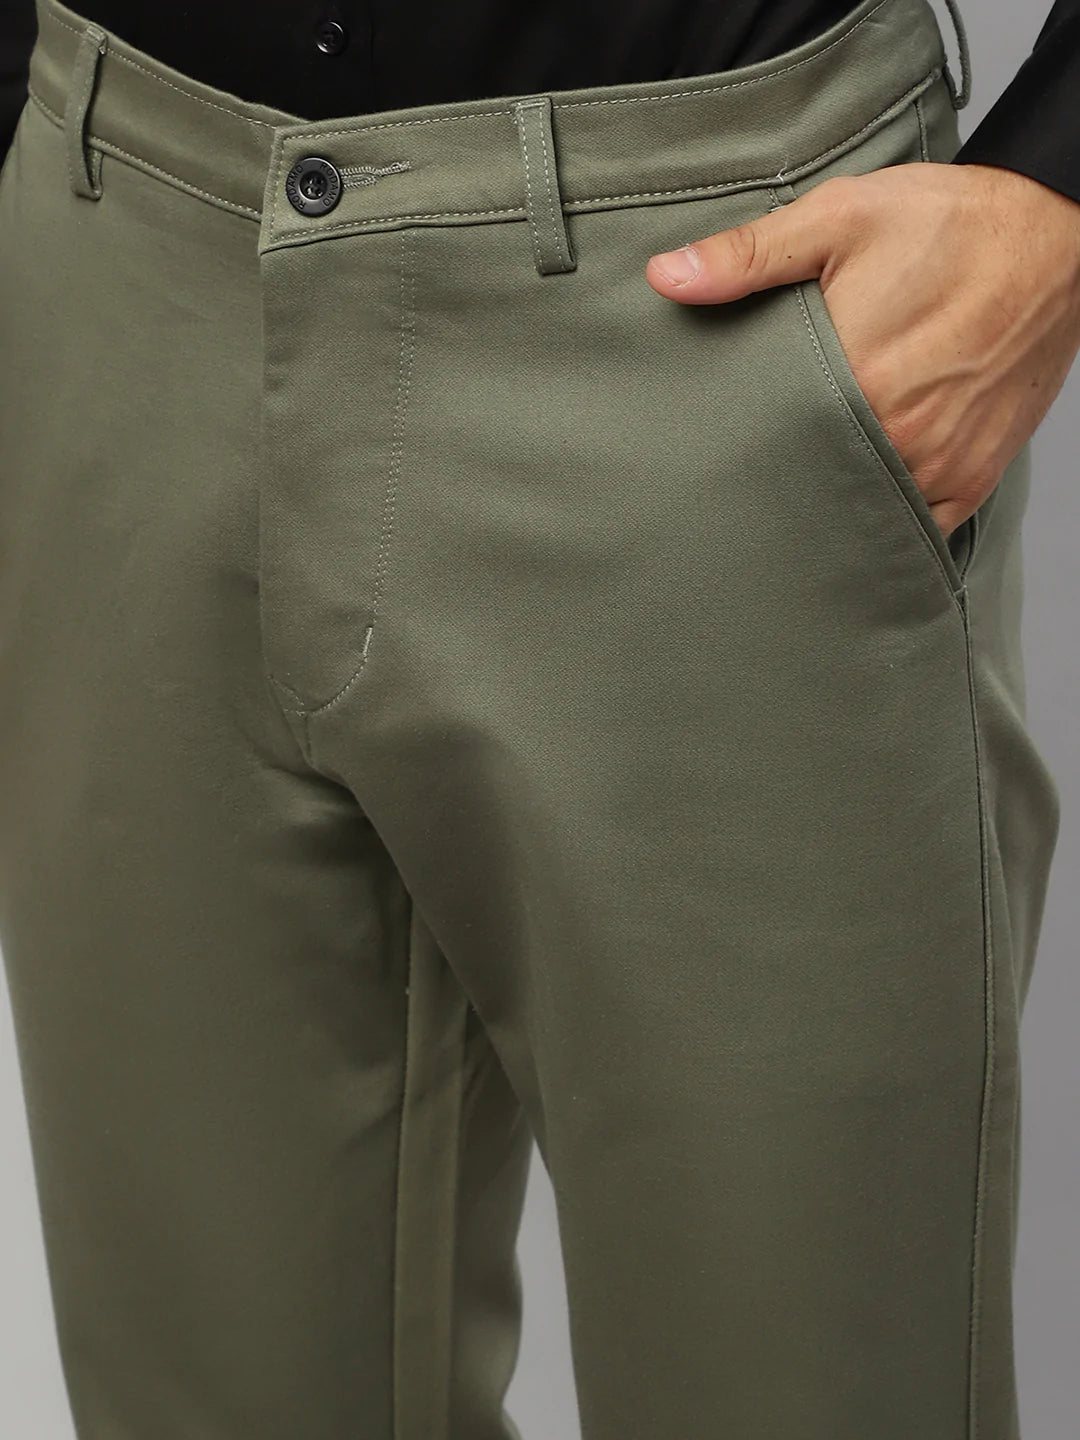 Relaxed-fit double-cloth trousers, olive green | MAX&Co.